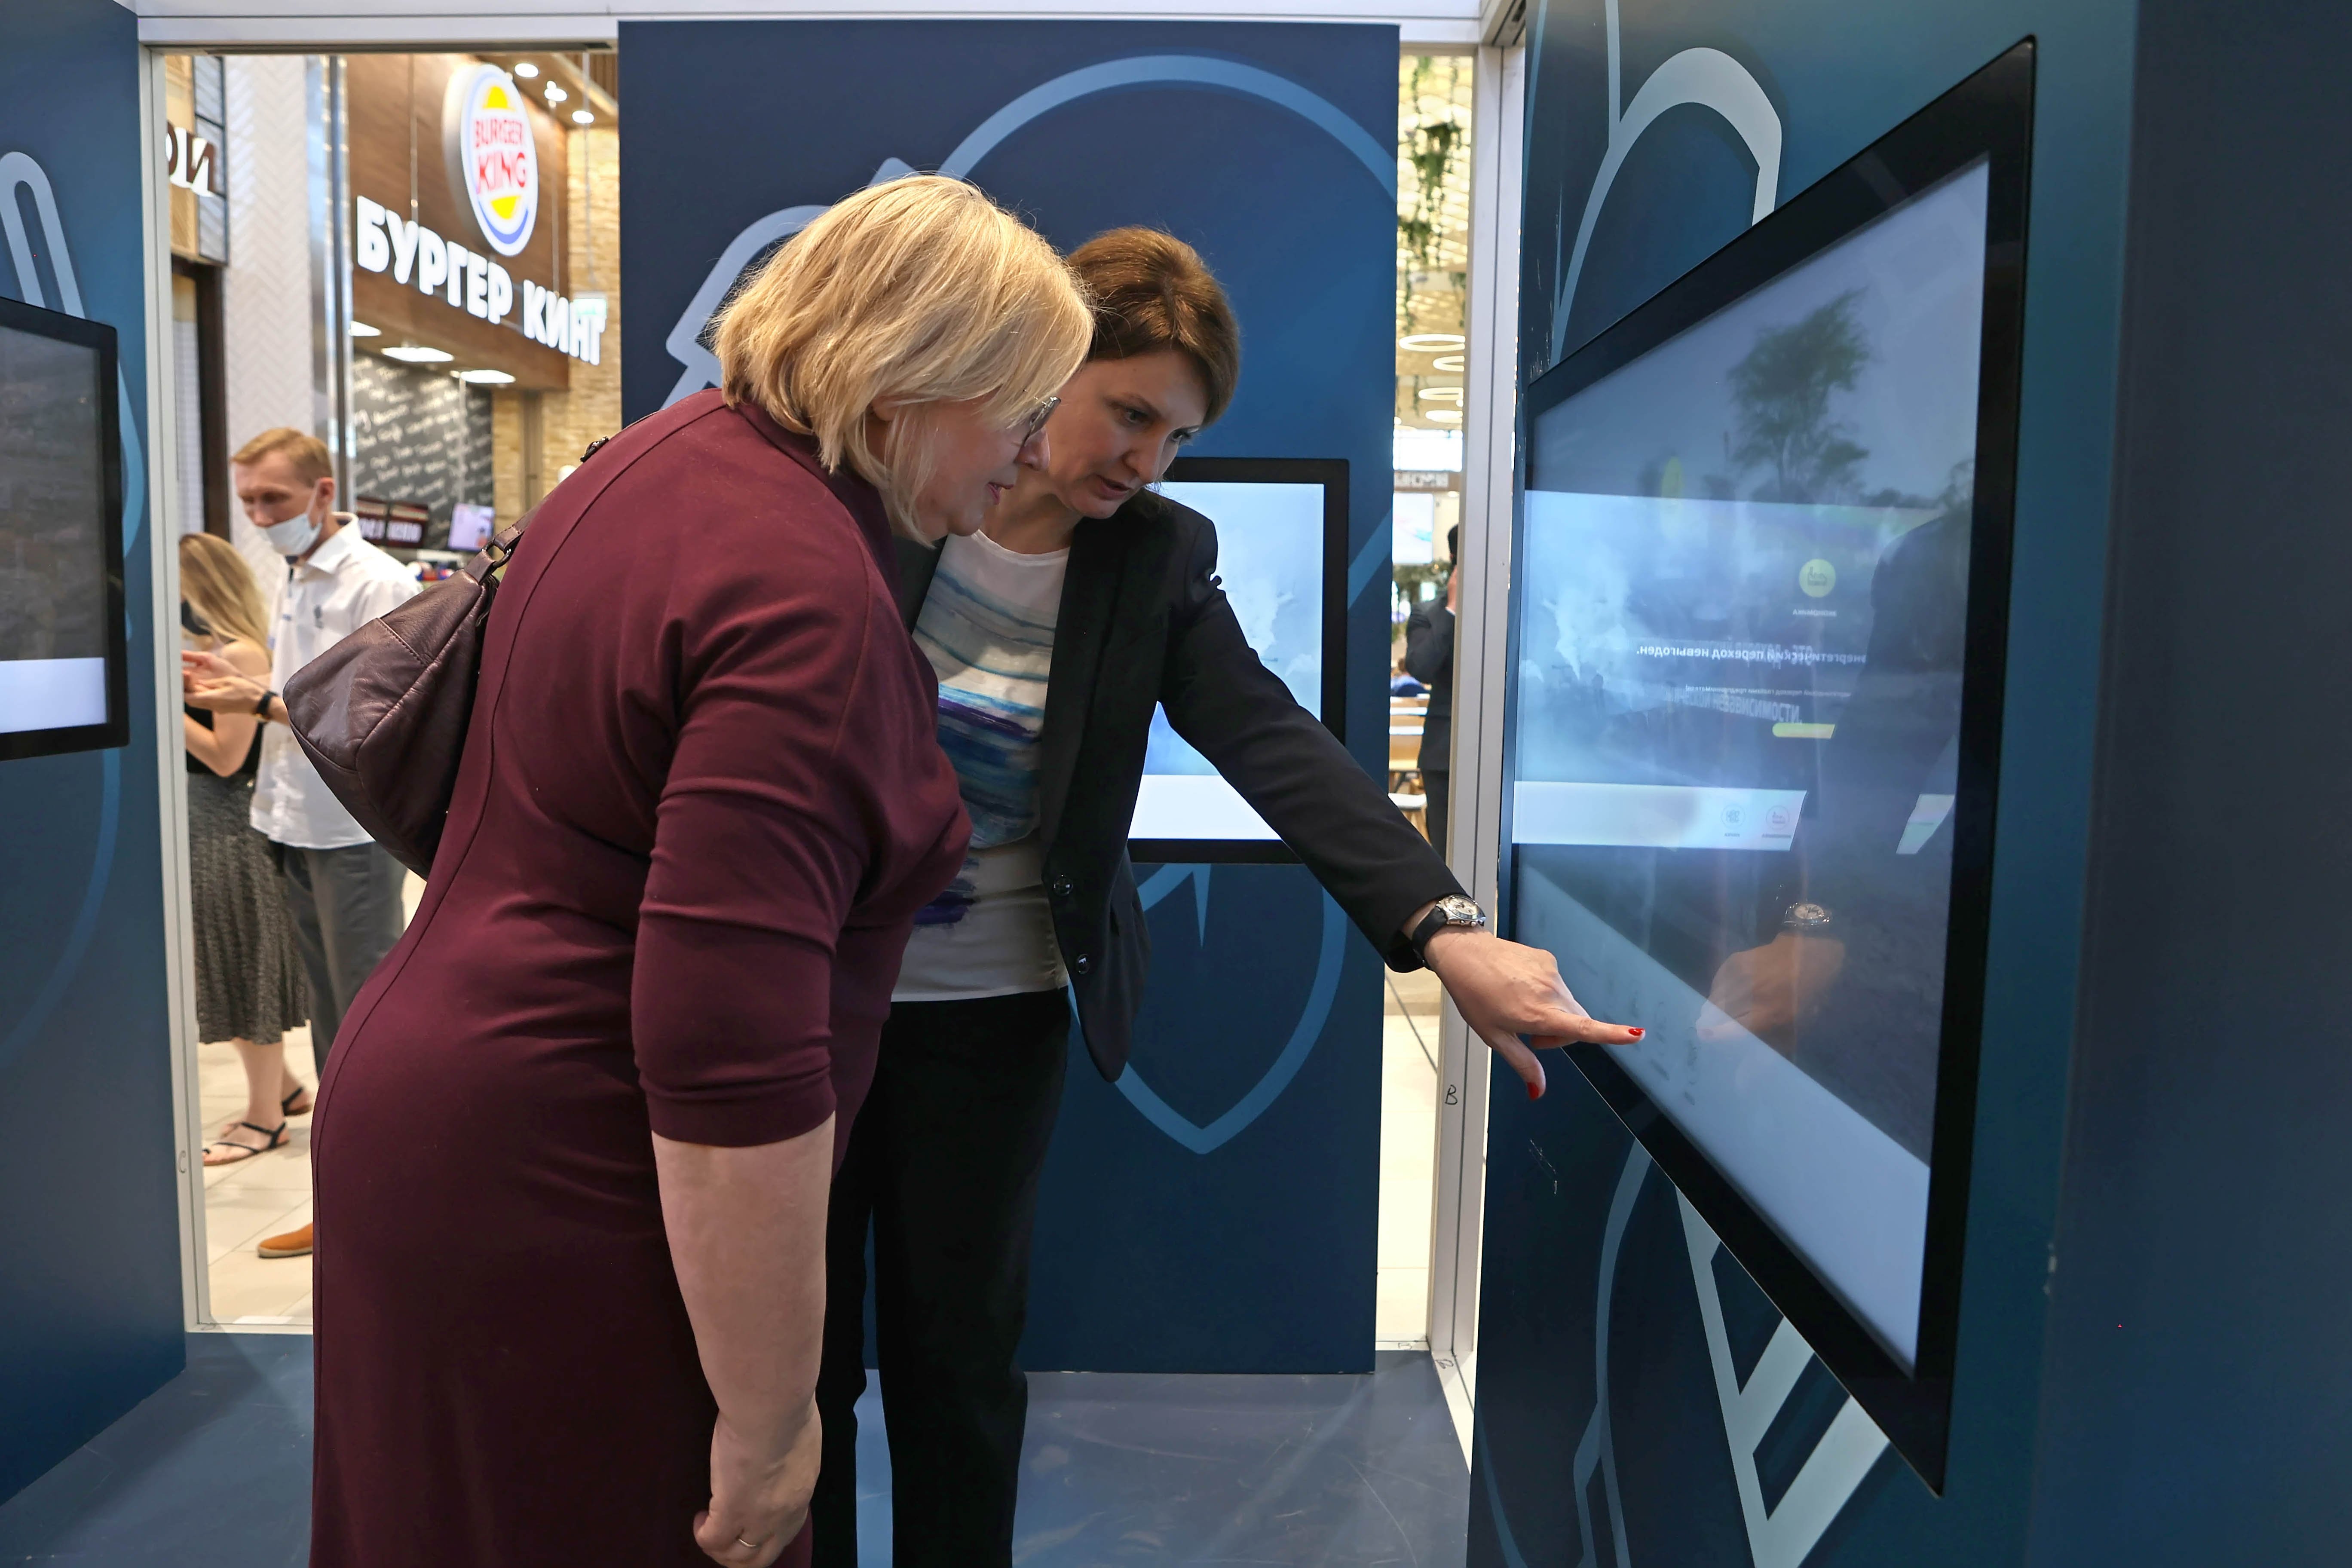 Two women are standing at the "Renewable Energies" station and are looking at a screen. June 2021.